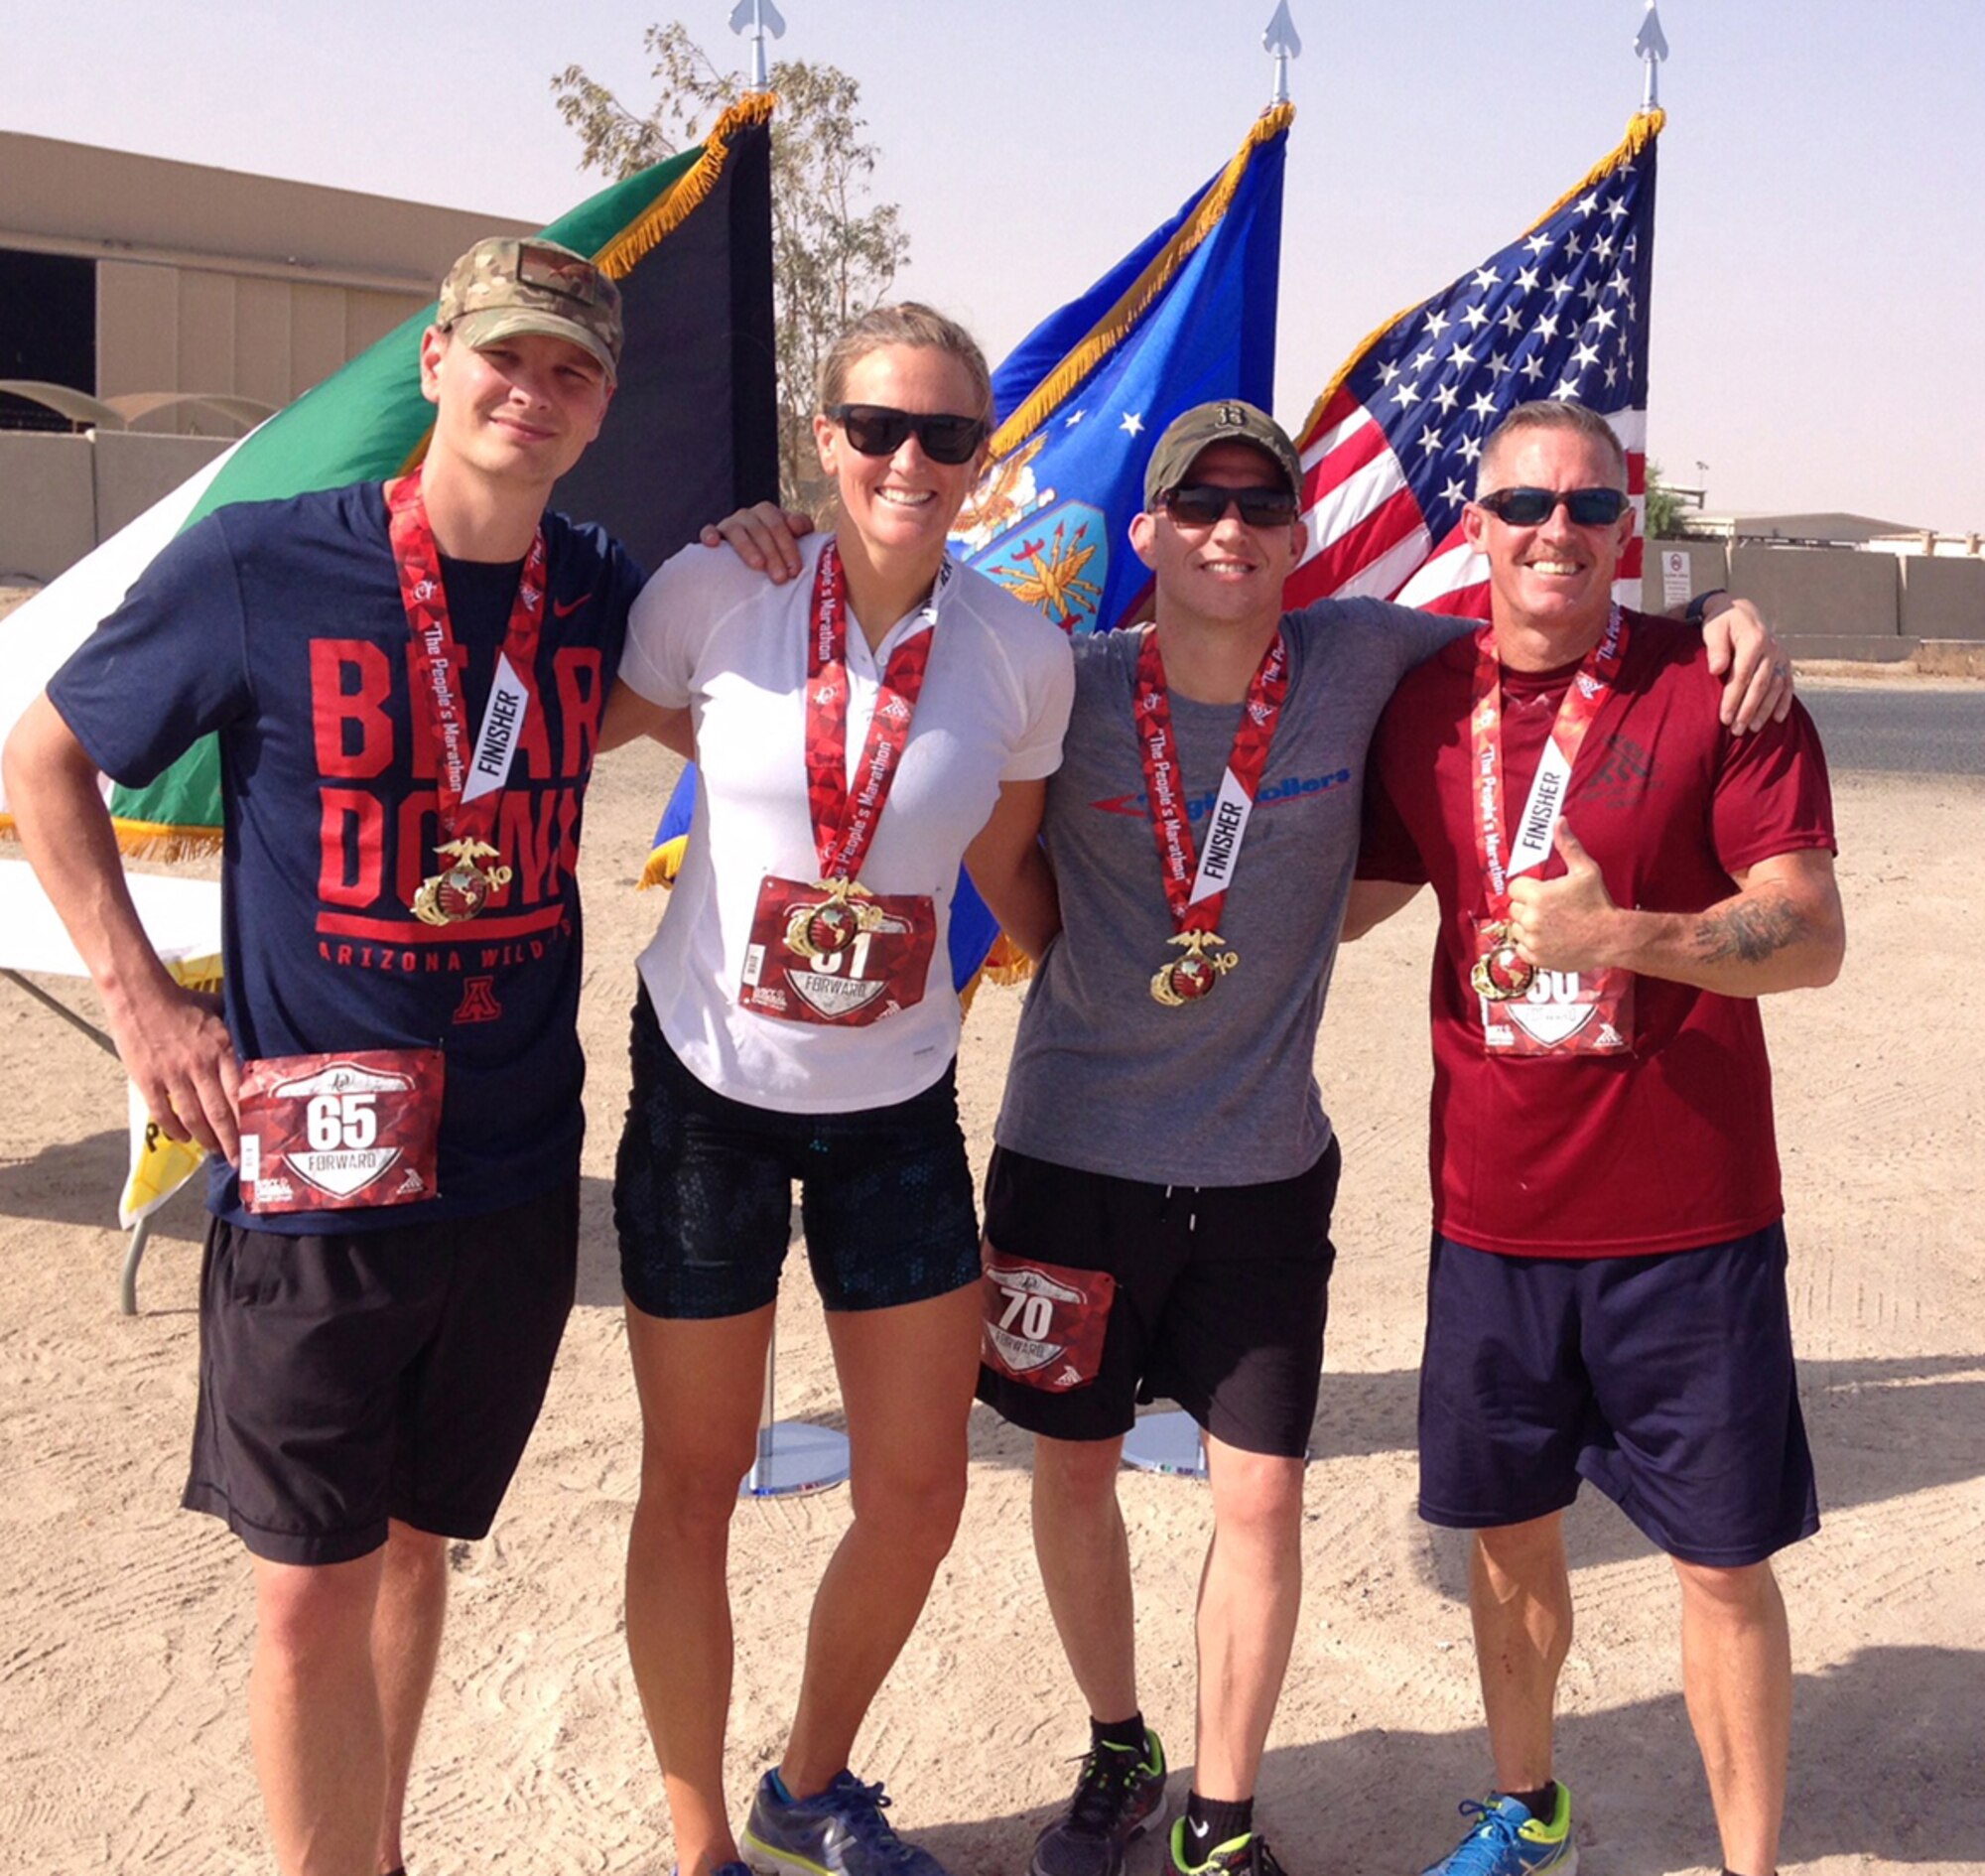 High Roller Deployers, (from left to right), Capt. Reed Kobernick, Capt. Merridy Stephenson, Master Sgt. Lyle Smith and Chief Master Sgt. Thomas Glover who all participated in the Marine Corps Marathon Forward. (Photo by a unnamed volunteer.)